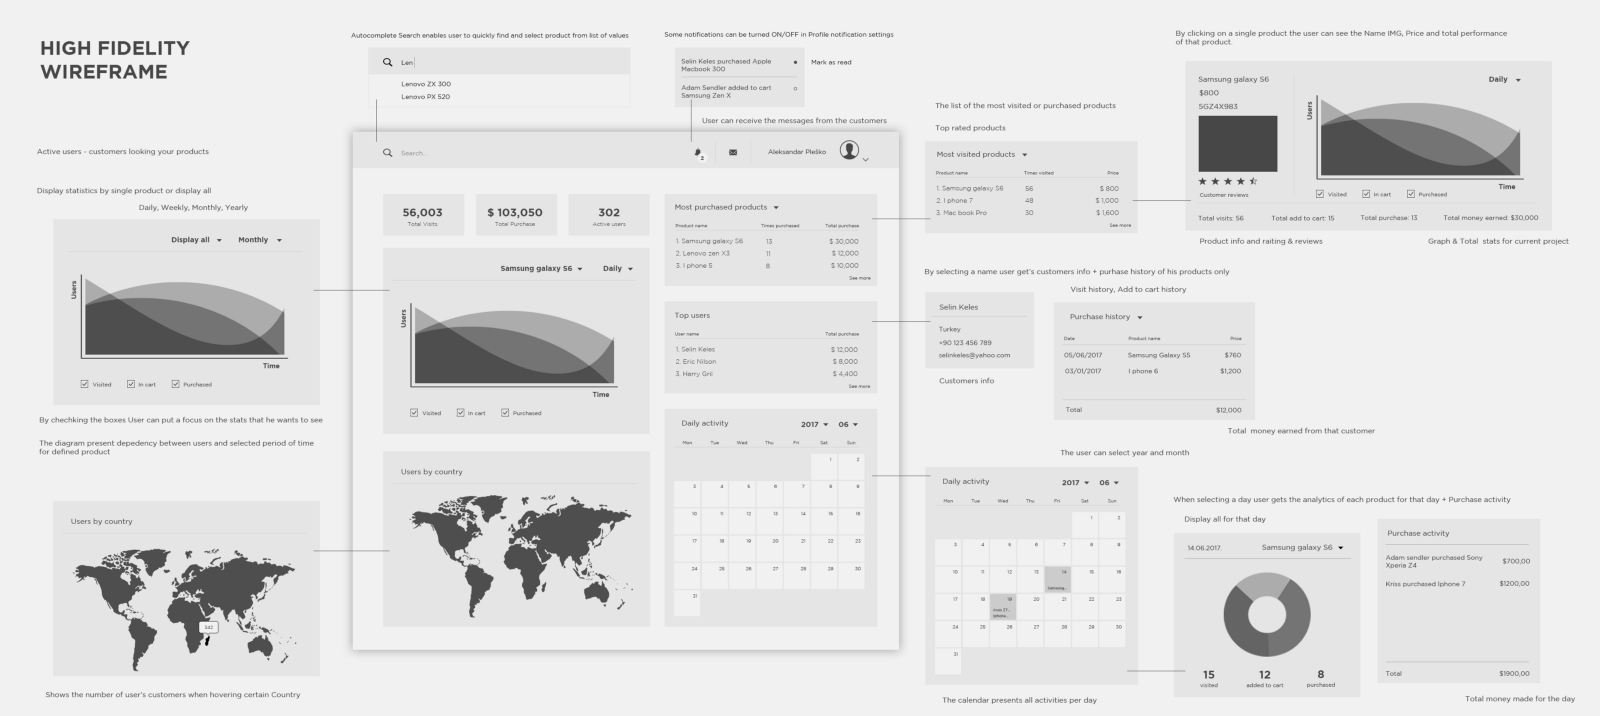 High-fidelity wireframe charts and graphs